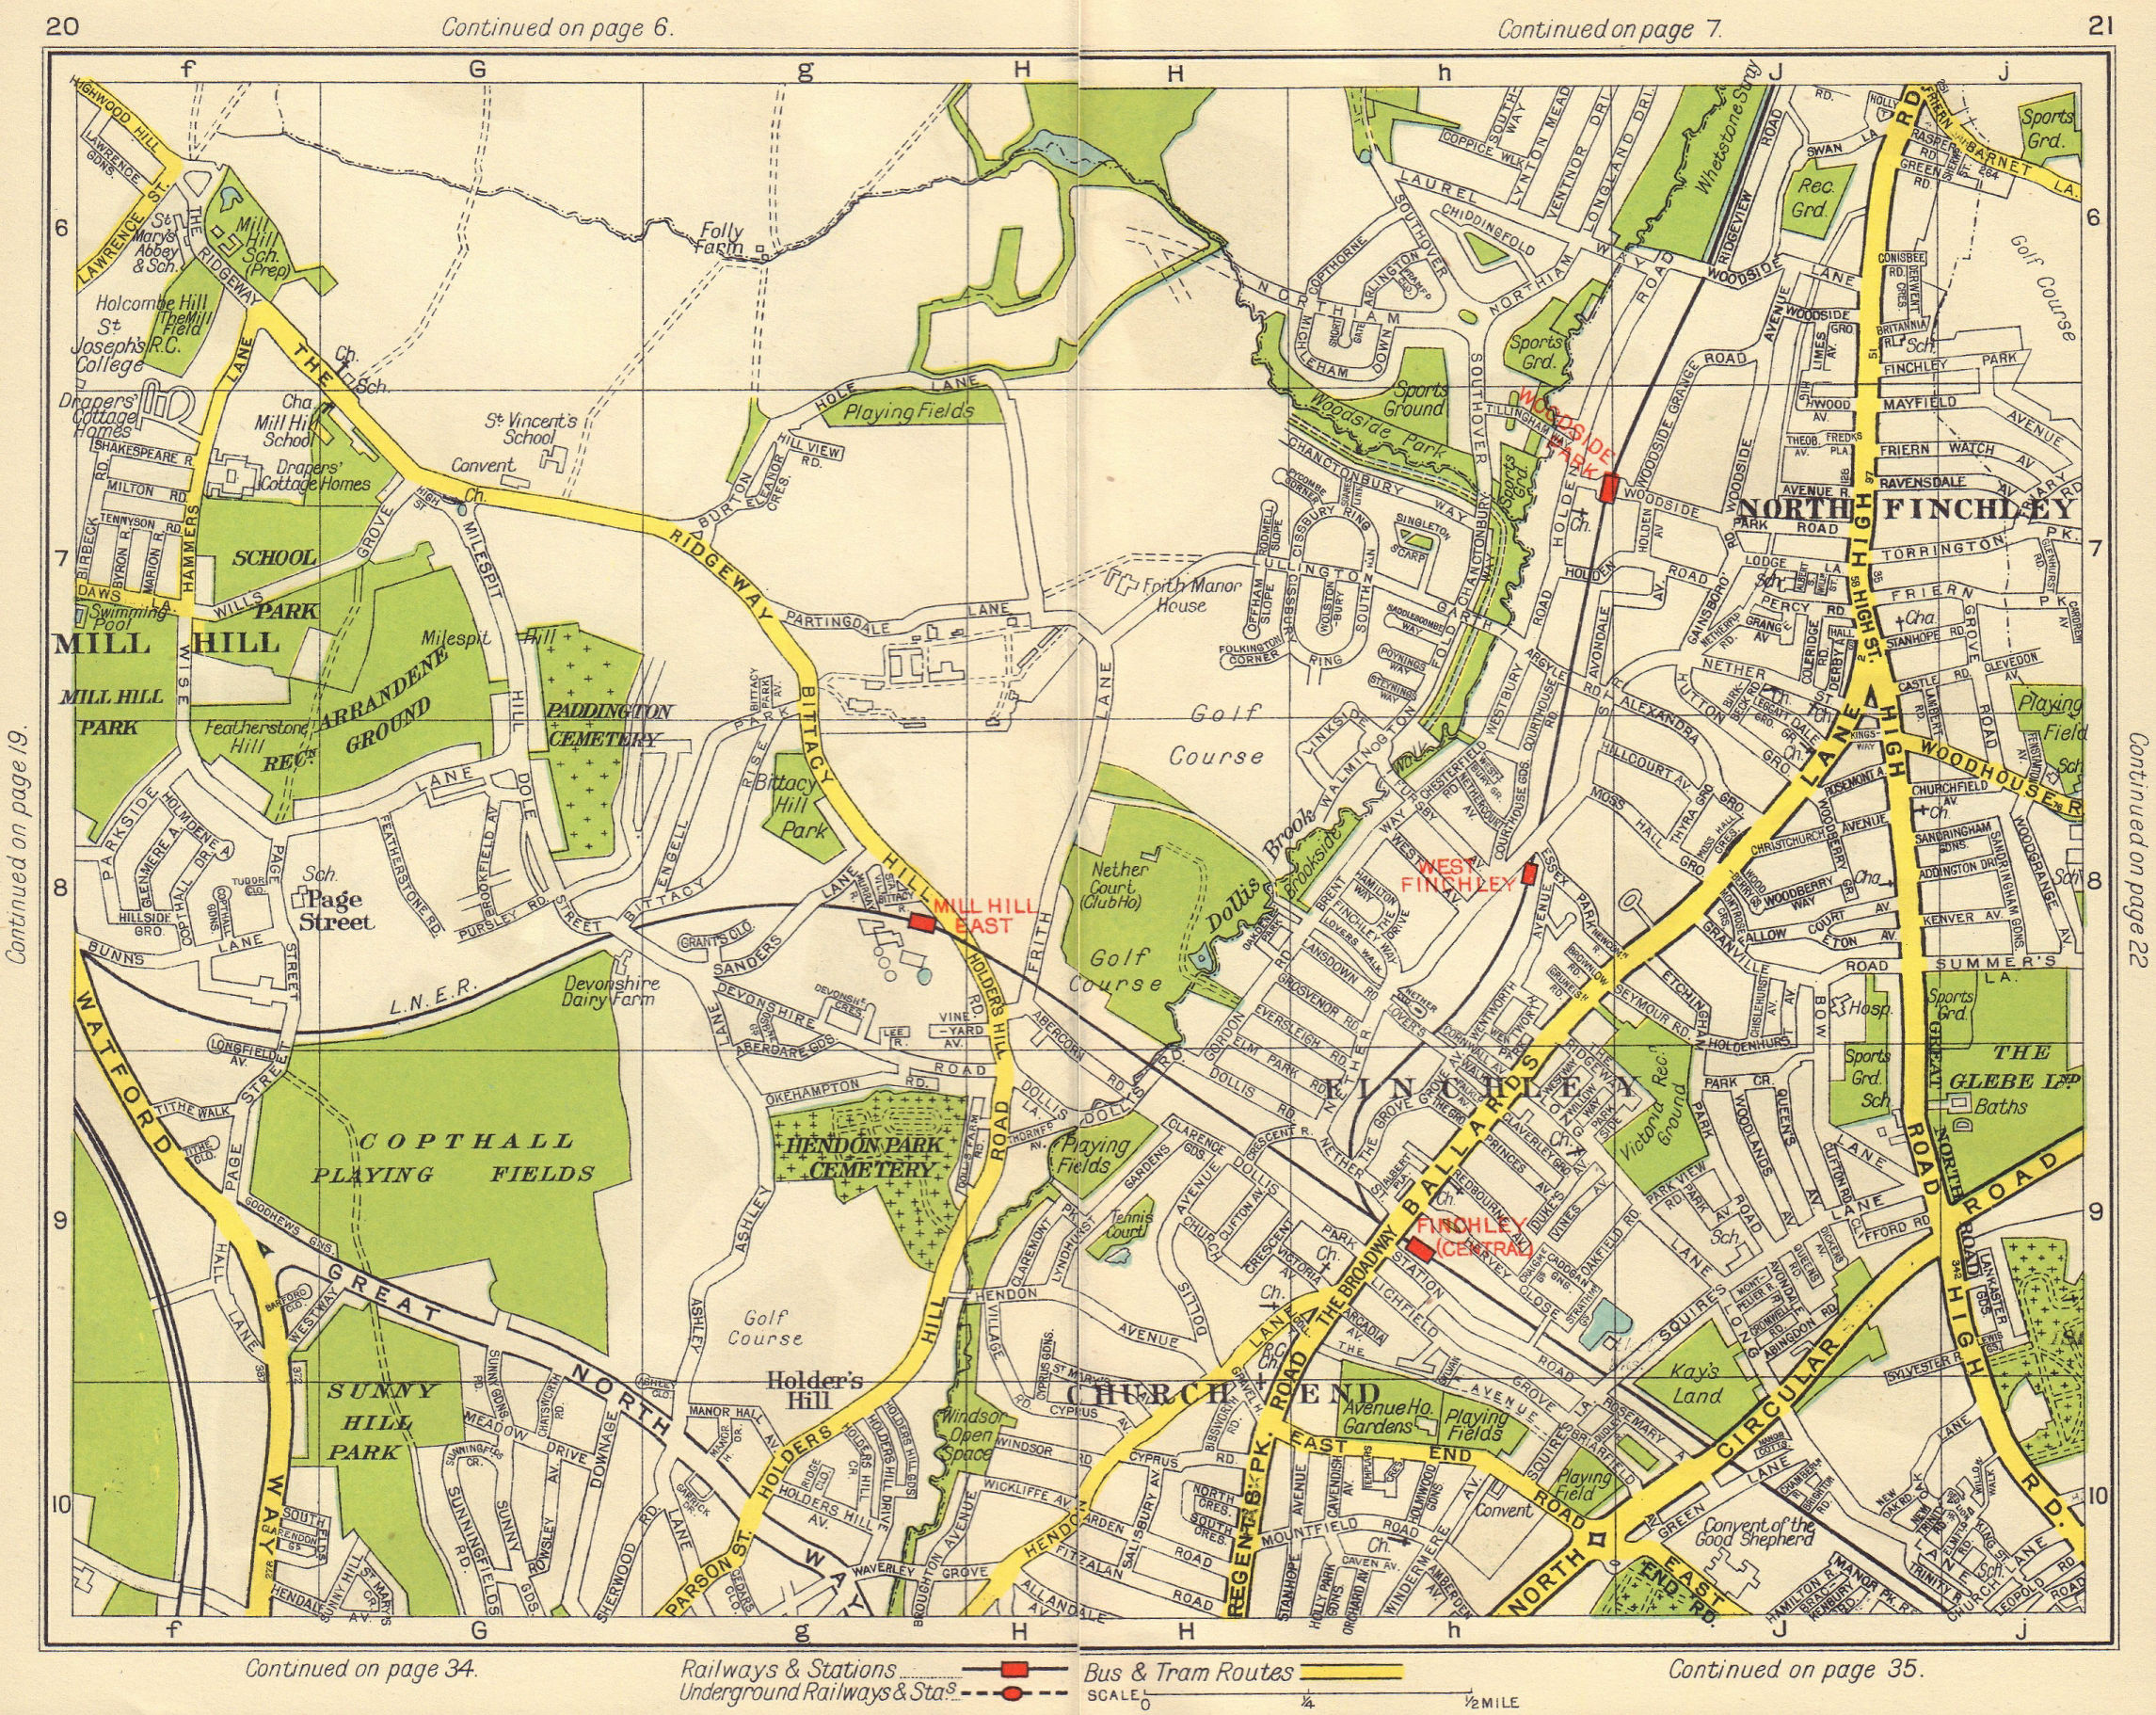 N LONDON. Church End Finchley Holder's Hill Mill Hill North Finchley 1948 map